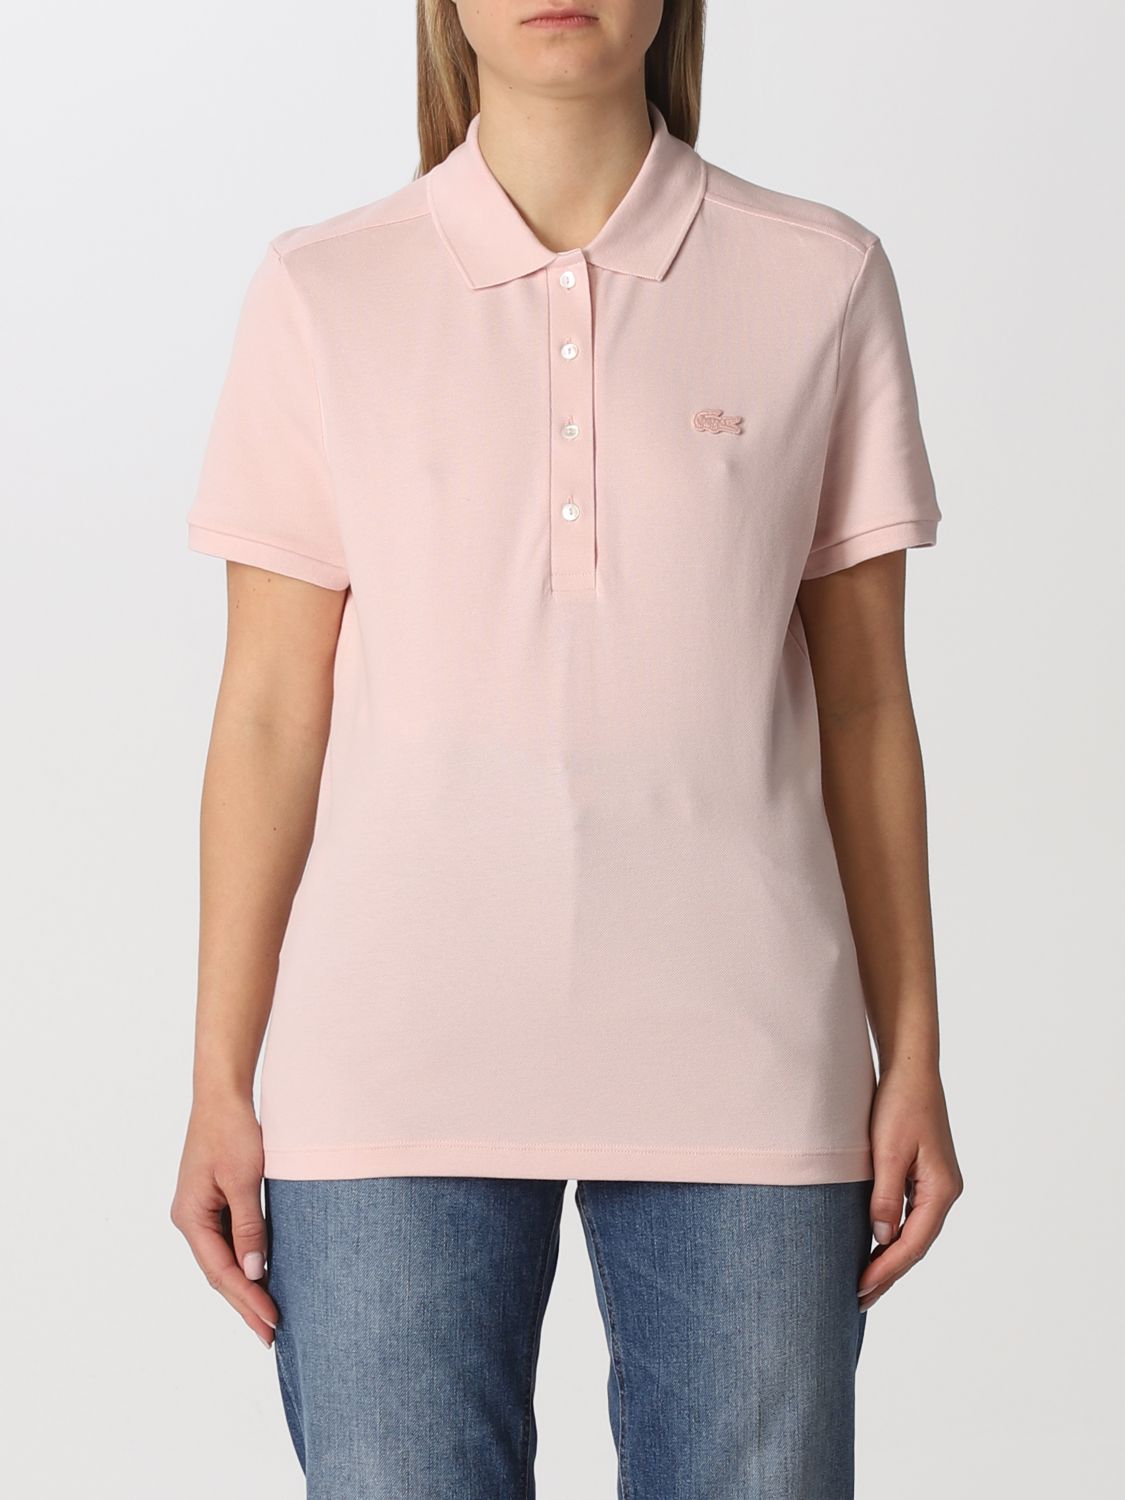 Tegenhanger uitsterven eetbaar LACOSTE: polo shirt for woman - Pink | Lacoste polo shirt PF5462 online on  GIGLIO.COM